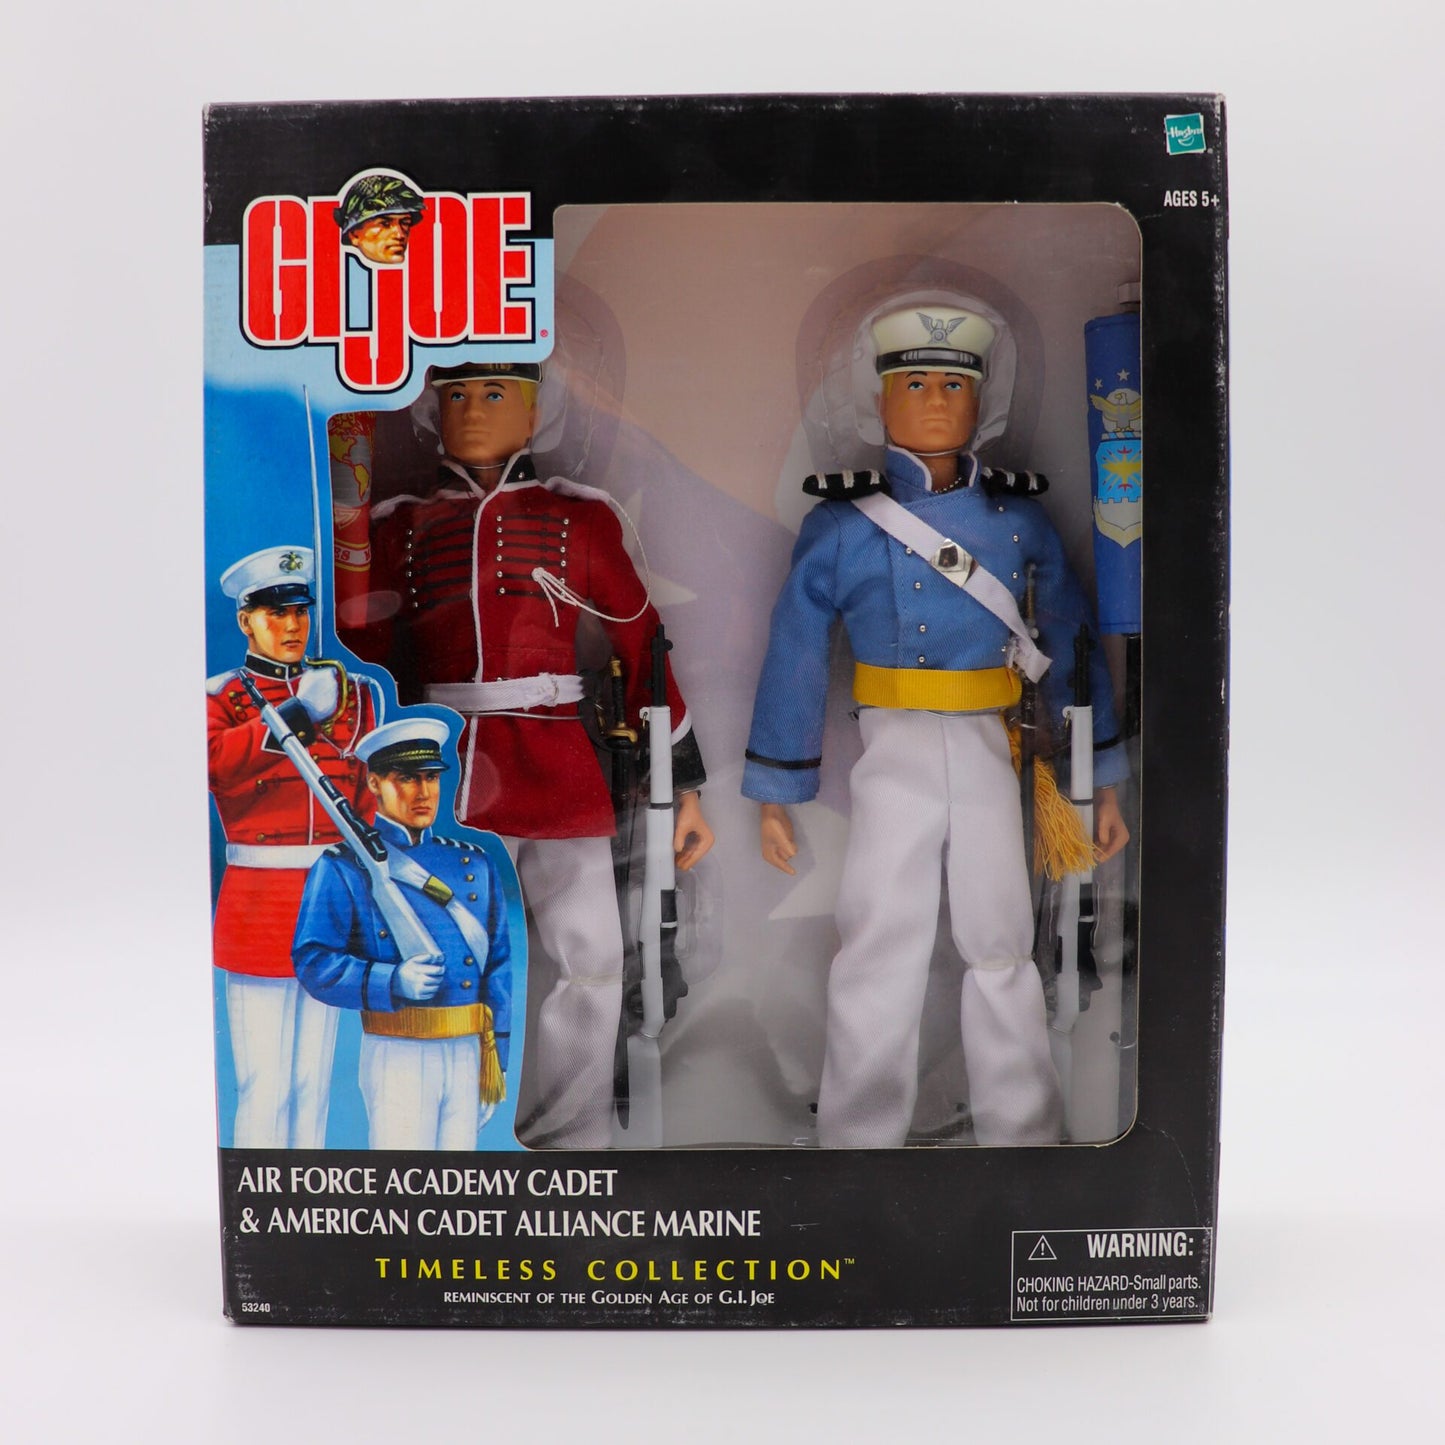 G.I. Joe Timeless Collection Air Force Academy Cadet & American Cadet Alliance Marine, Mint in Box